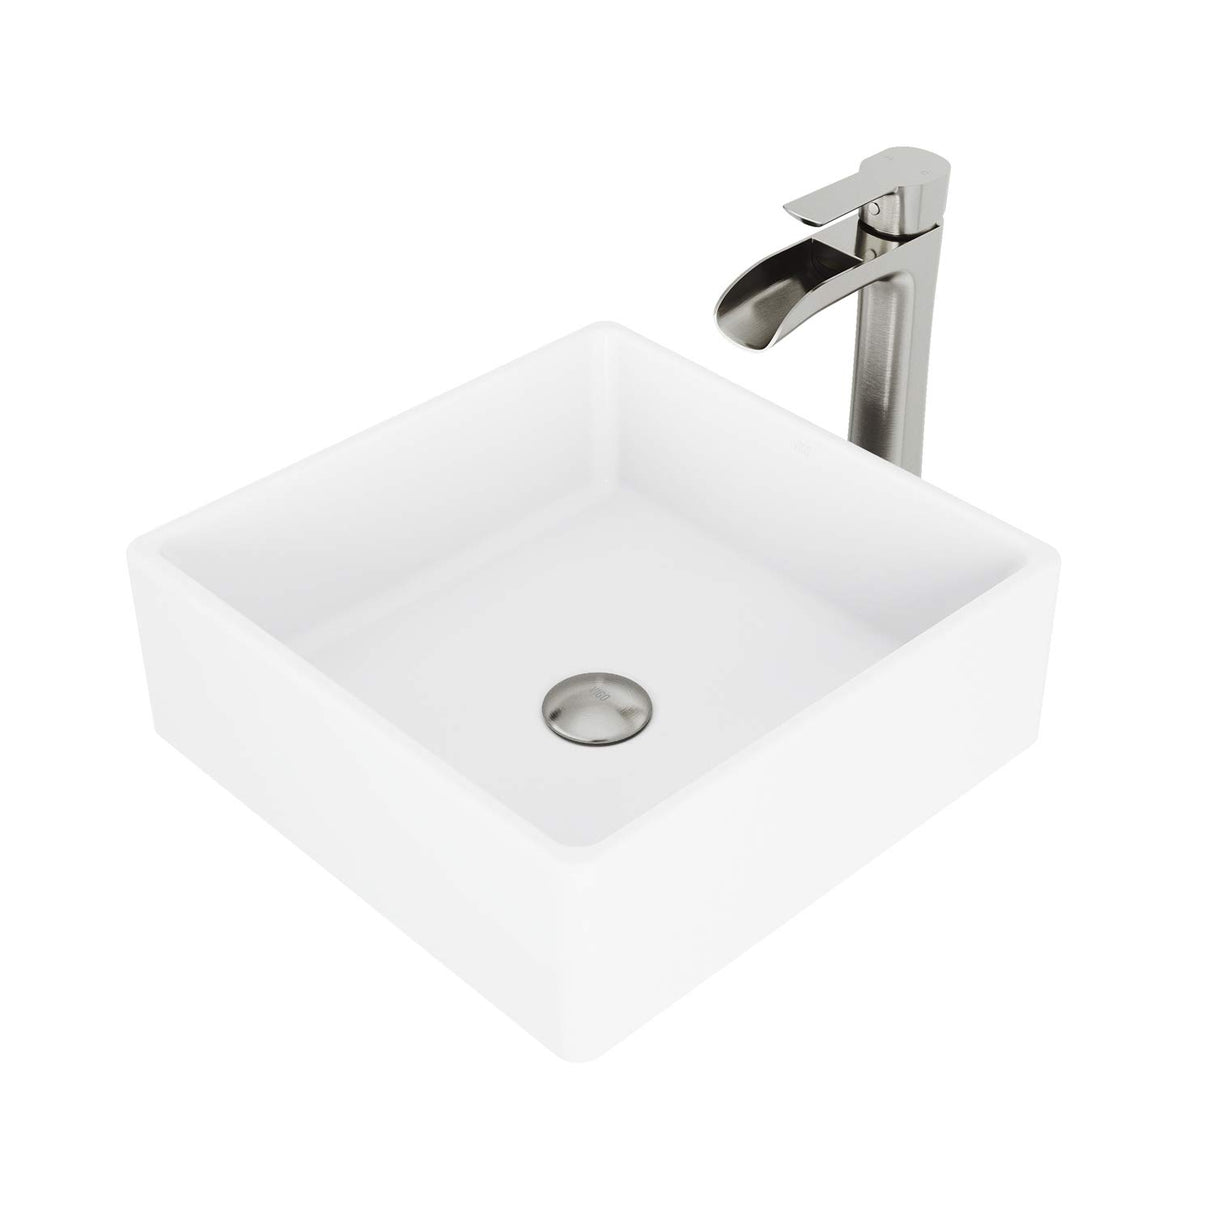 VIGO VGT1082BN 14.5" L -14.5" W -10.5" H Handmade Matte Stone Square Vessel Bathroom Sink Set in Matte White Finish with Brushed Nickel Single-Handle Single Hole Waterfall Faucet and Pop Up Drain